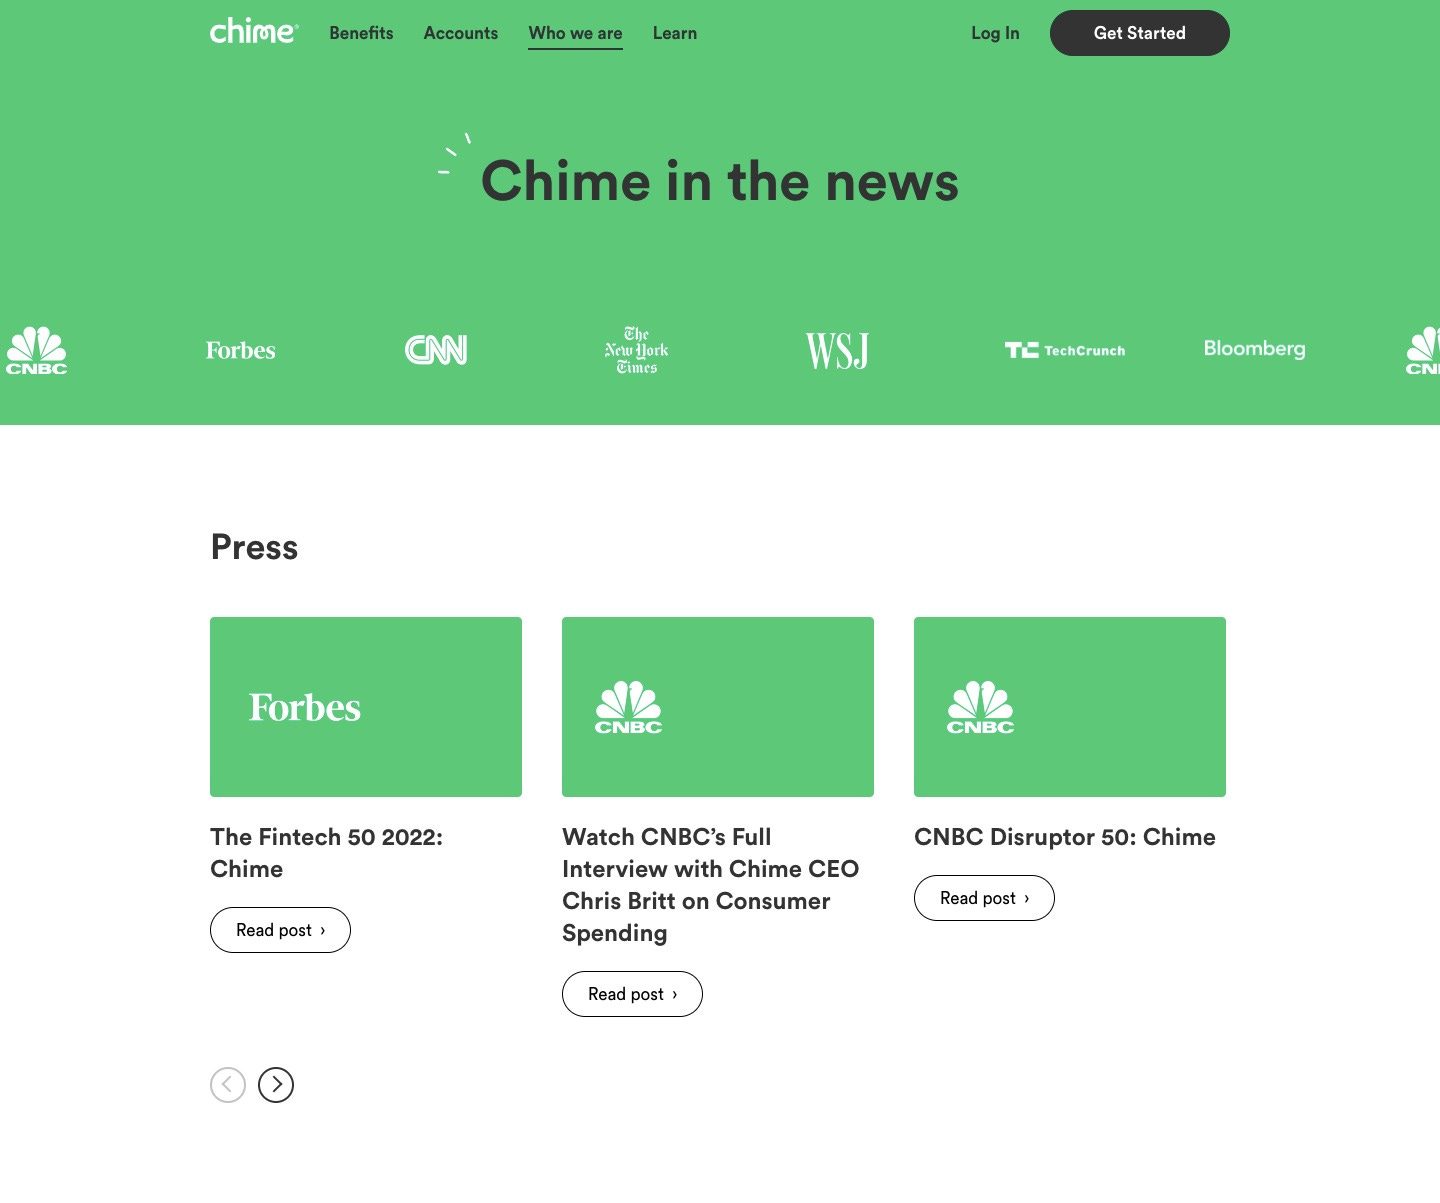 Chime content marketing case study: In the news